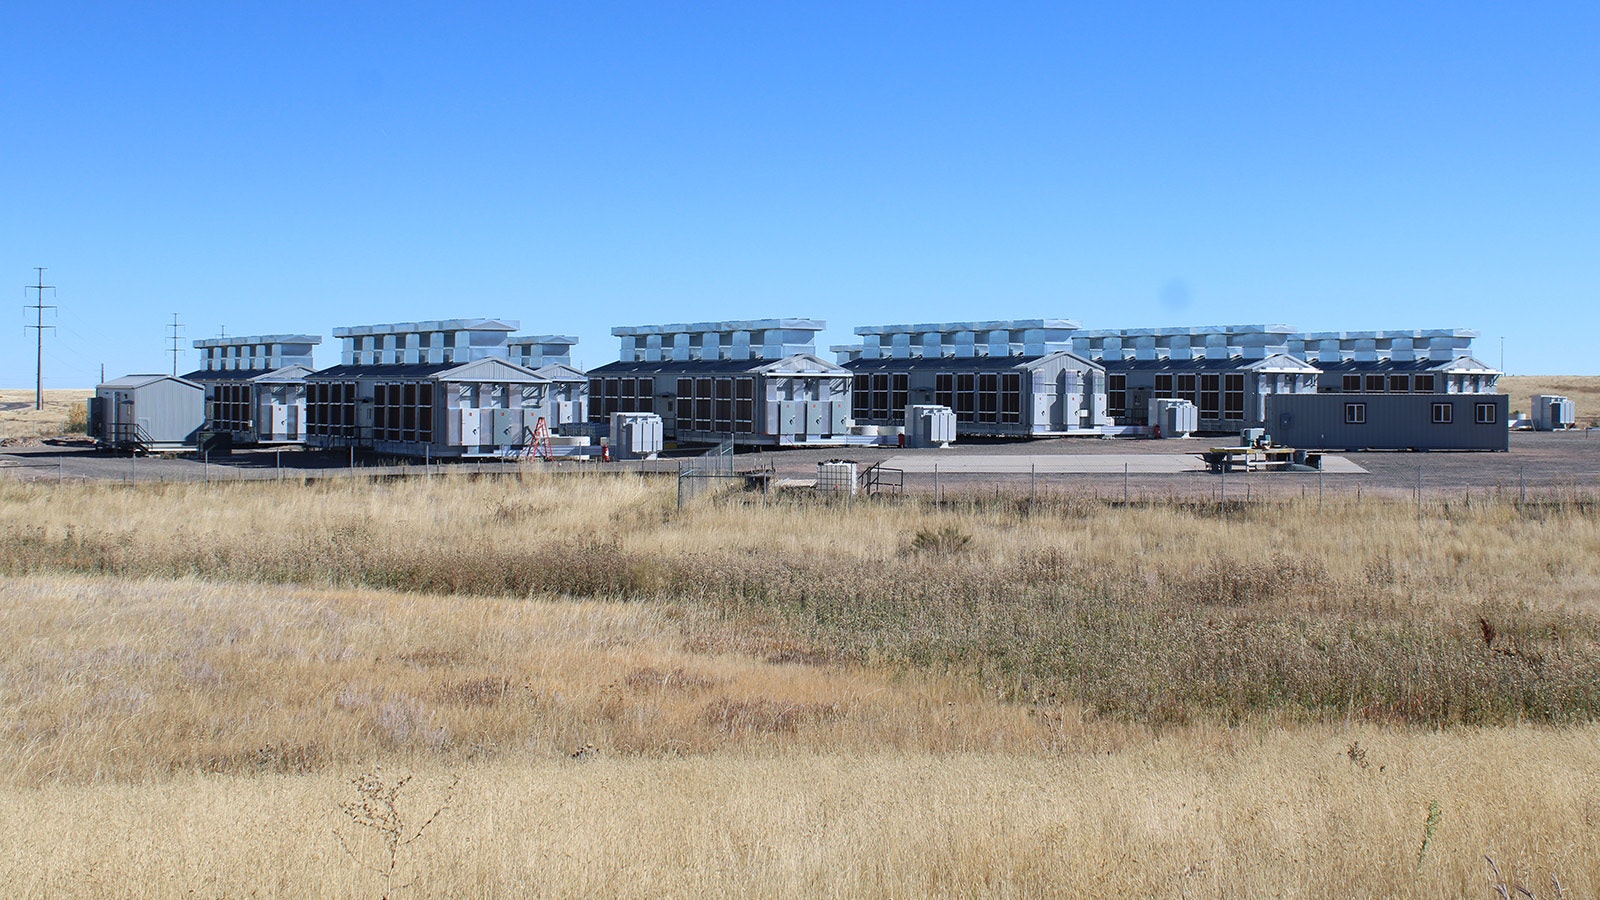 A Chinese bitcoin mining facility near F.E. Warren Air Force Base just west of Cheyenne.